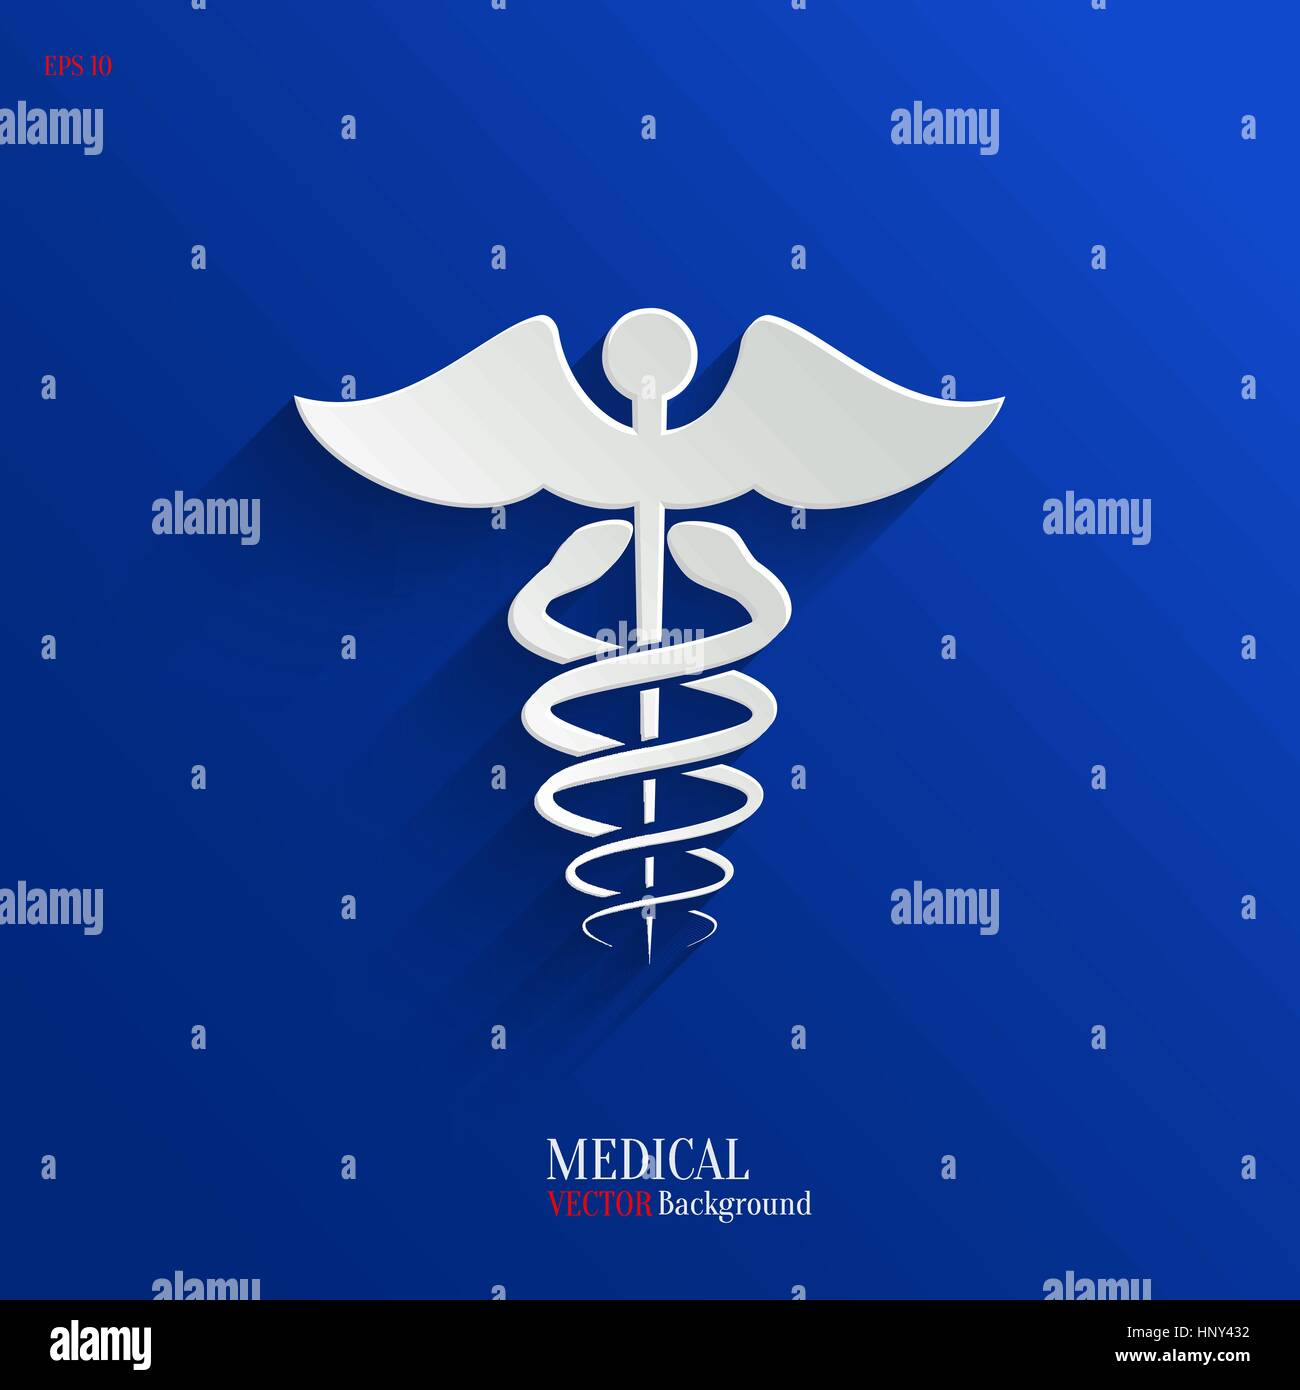 Abstract Medical Background with Caduceus Medical Symbol. Vector Icon Stock Vector